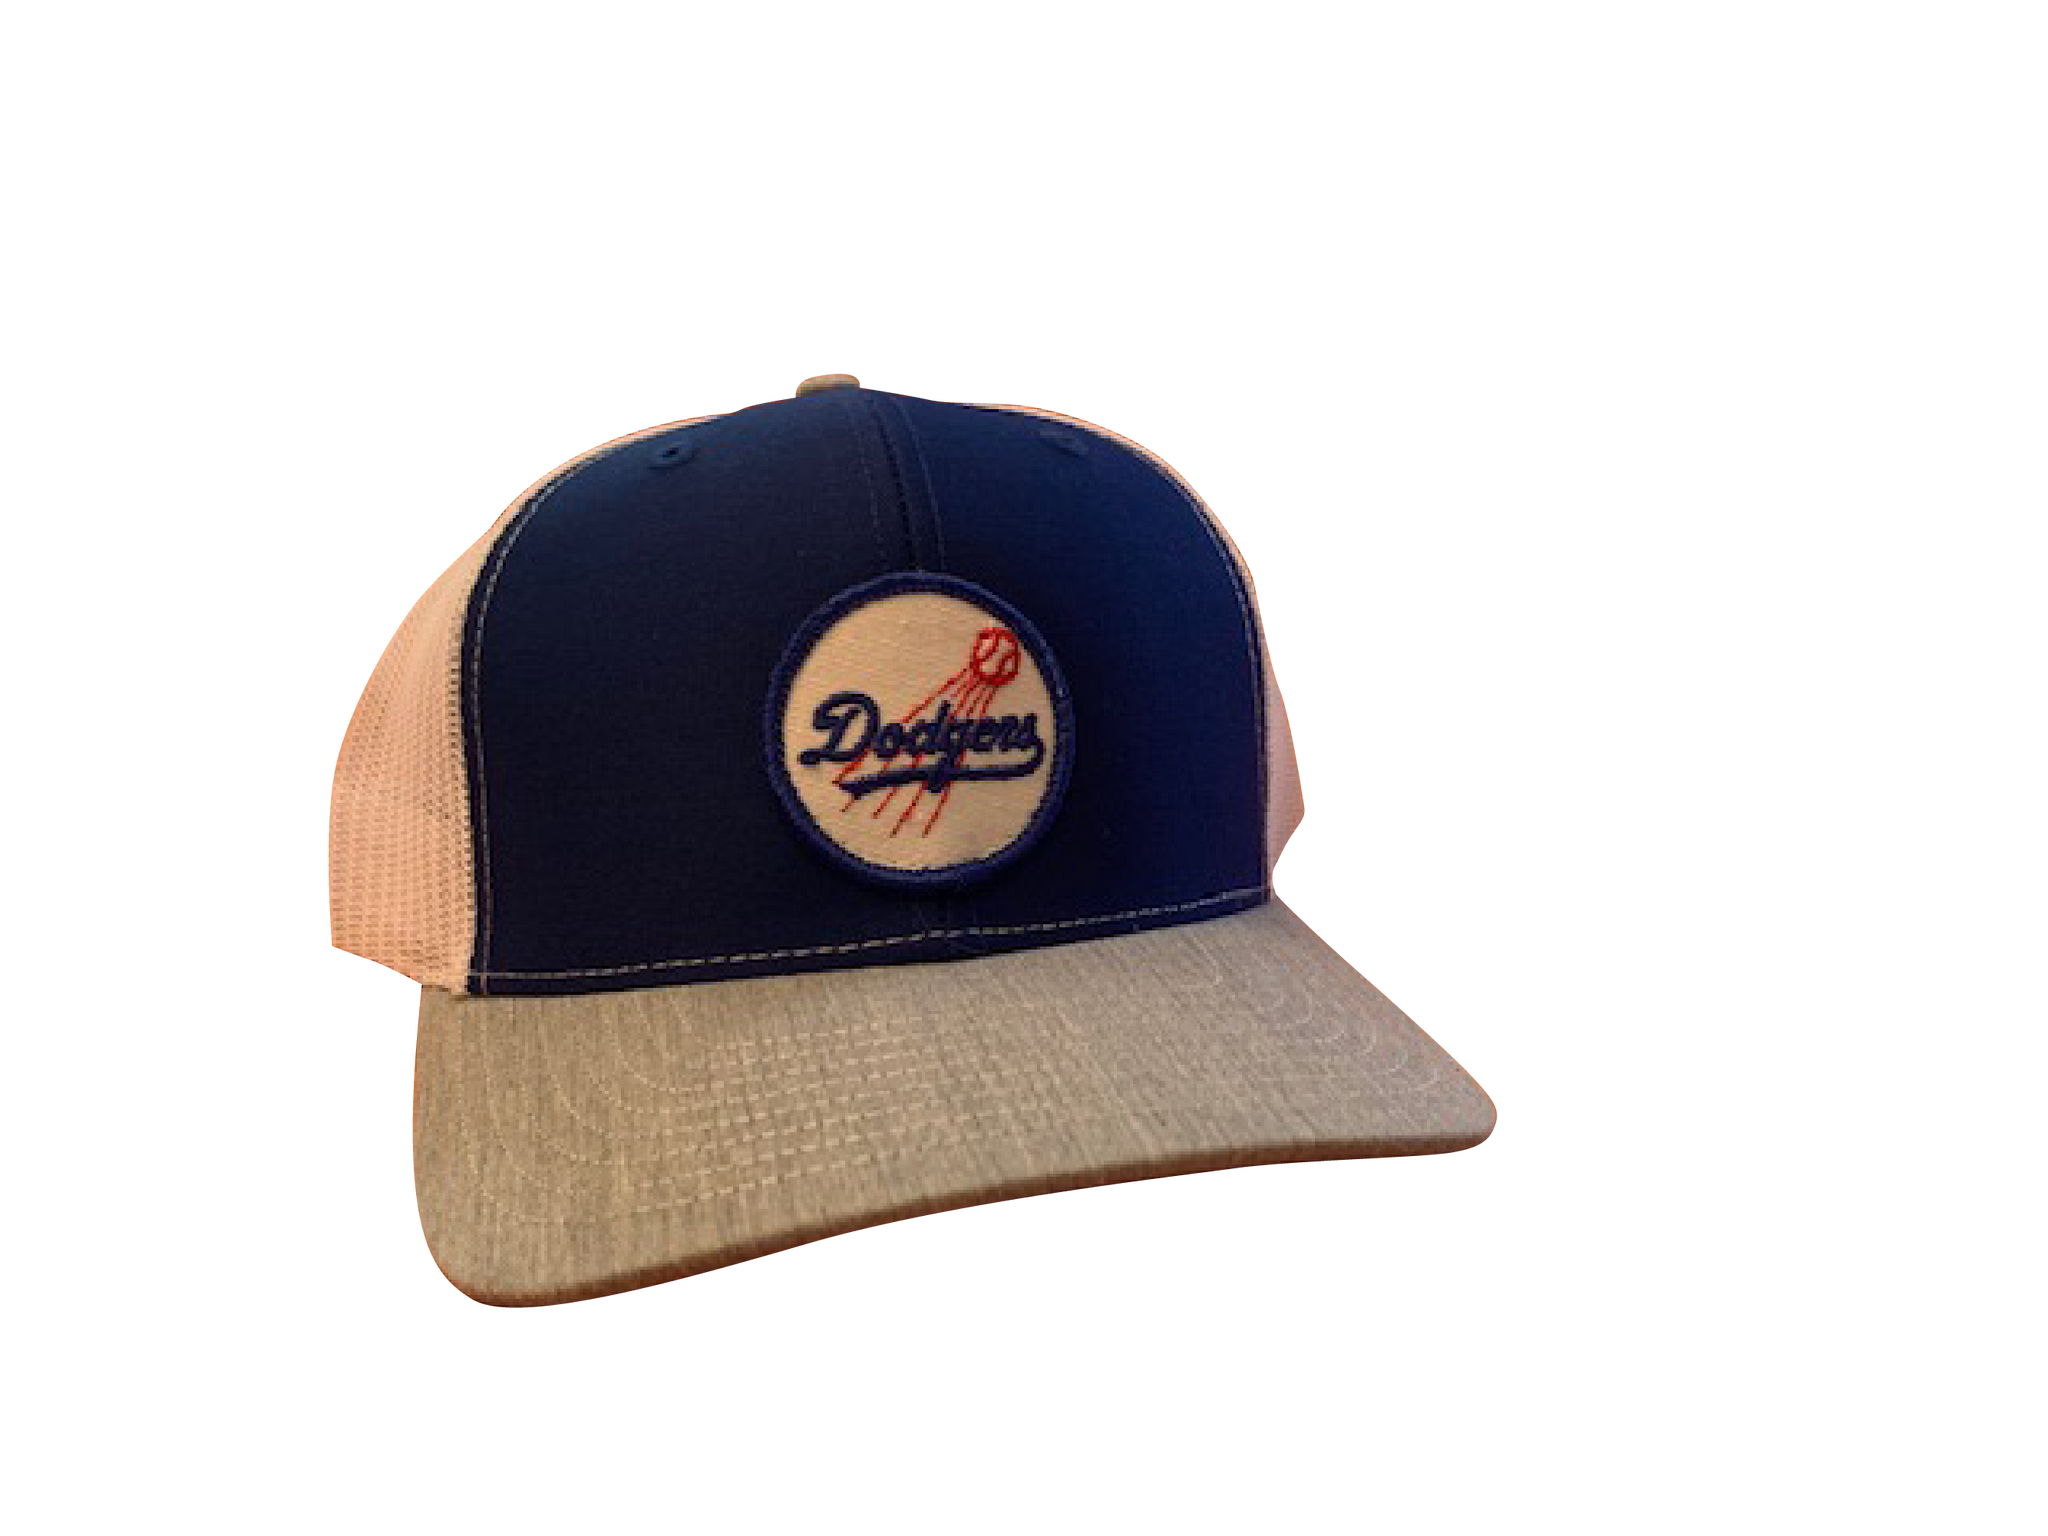 Los Angeles Dodgers Patch Trucker Cap - Royal/Heather/White